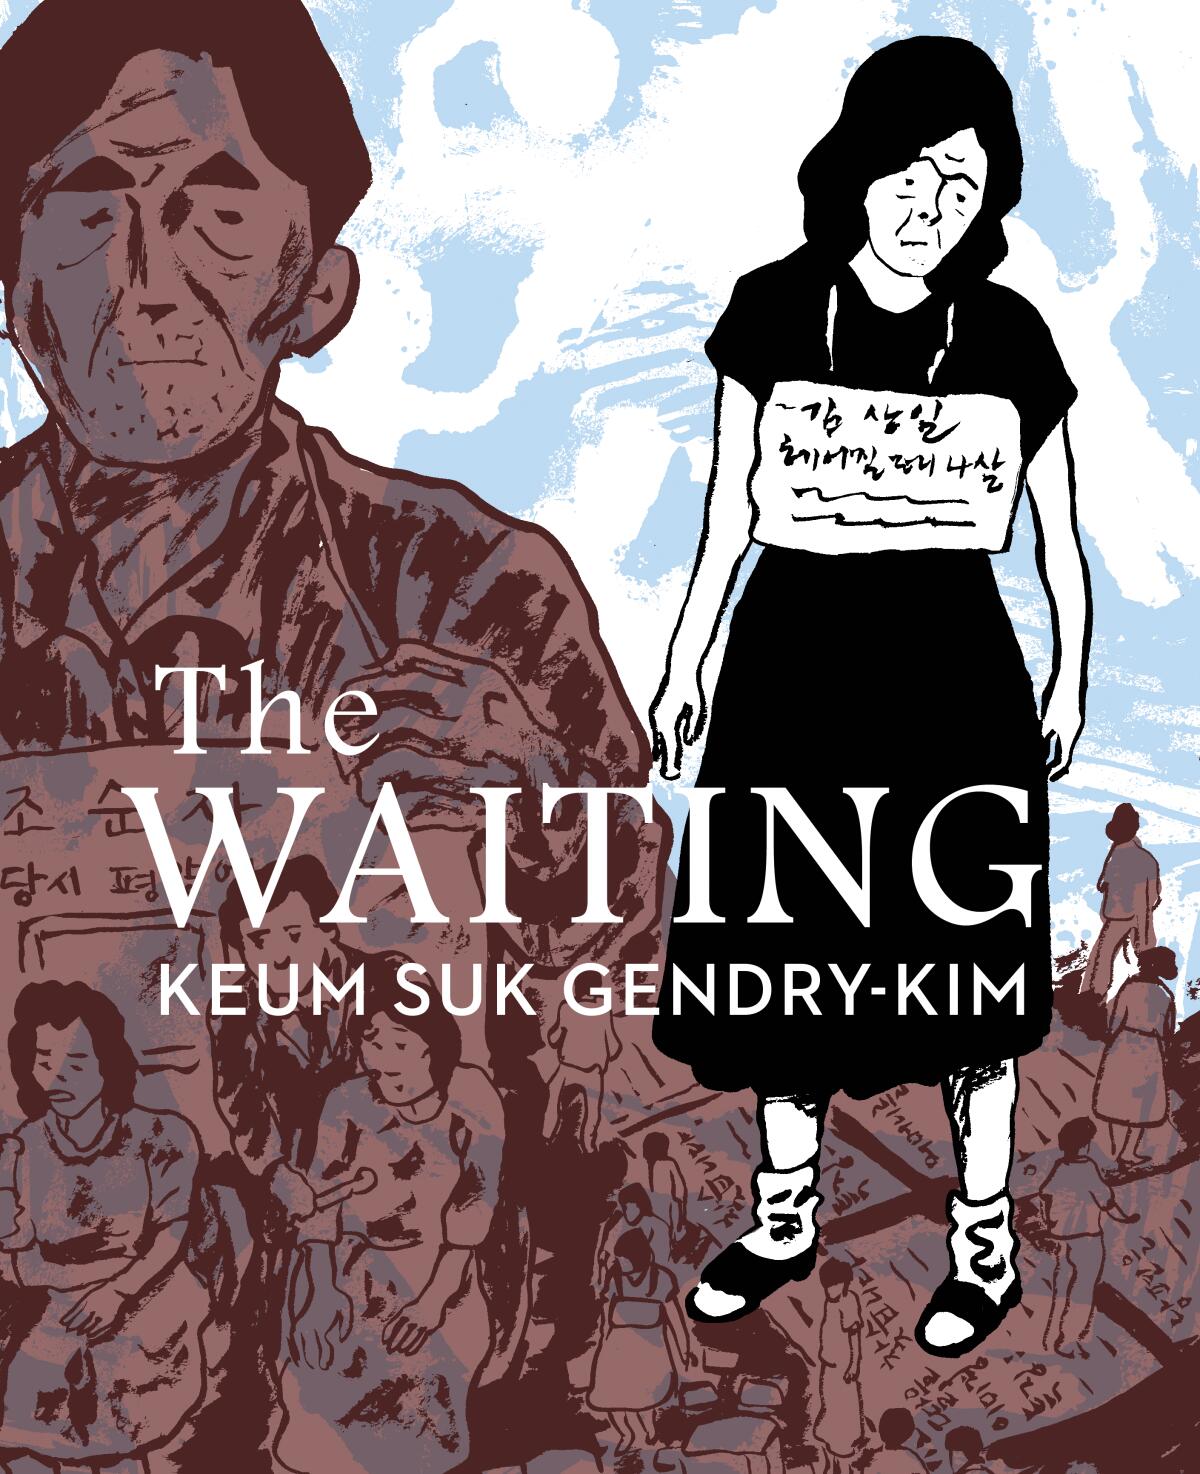 The book cover of  Keum Suk Gendry-Kim's graphic novel, "The Waiting"